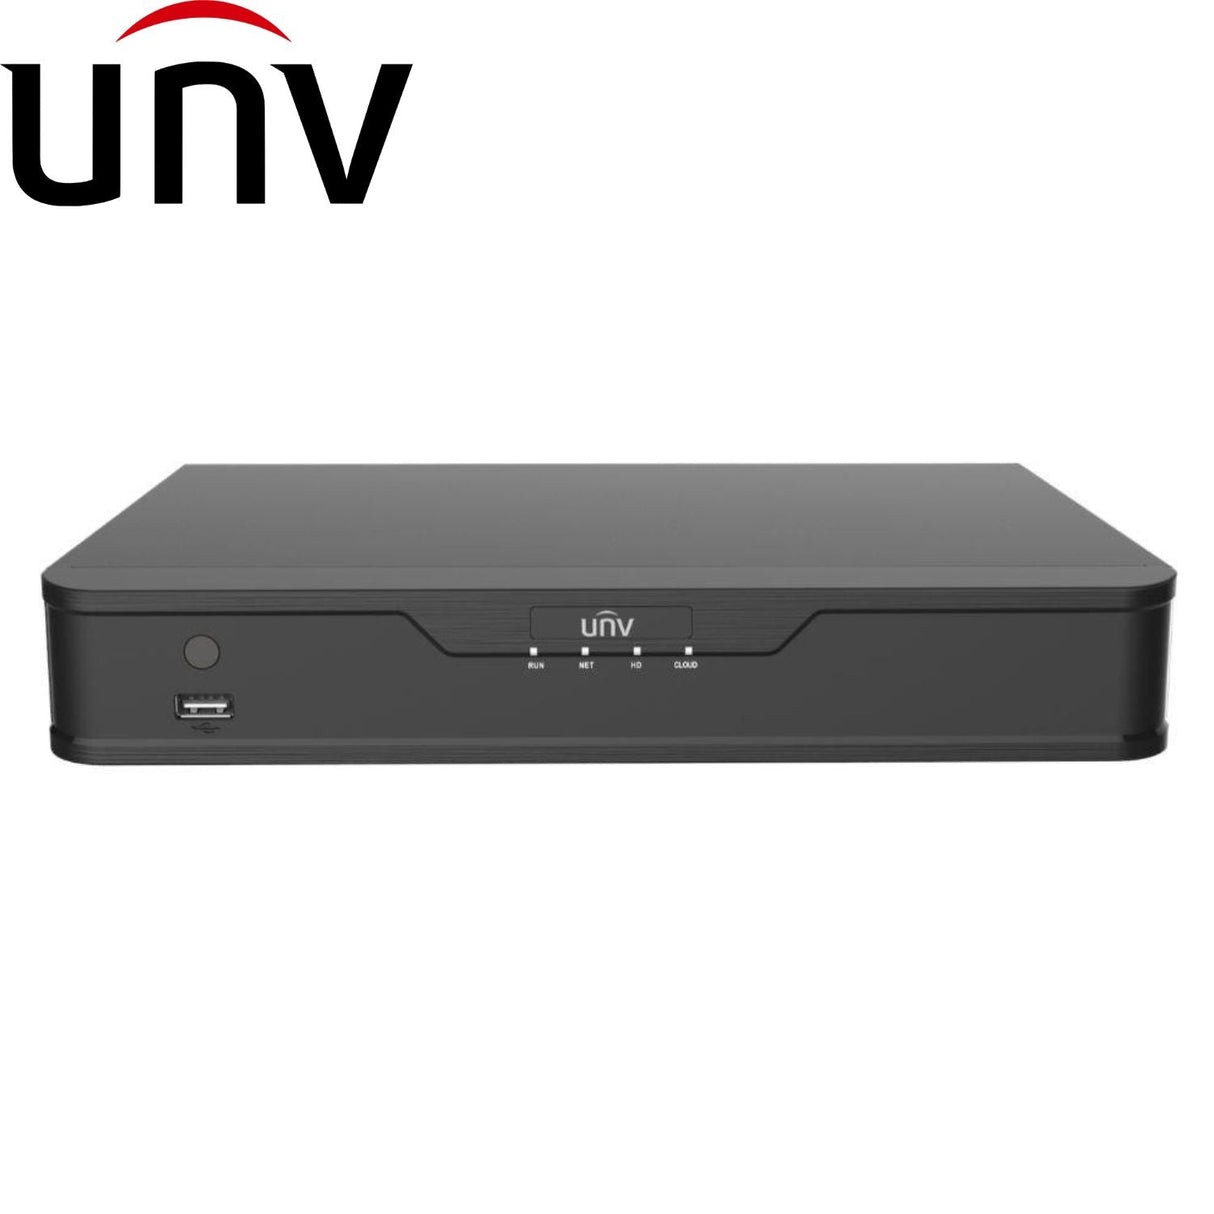 Uniview ColourHunter Security System: 4x 8MP Turret Cams, 4CH 4K NVR + HDD